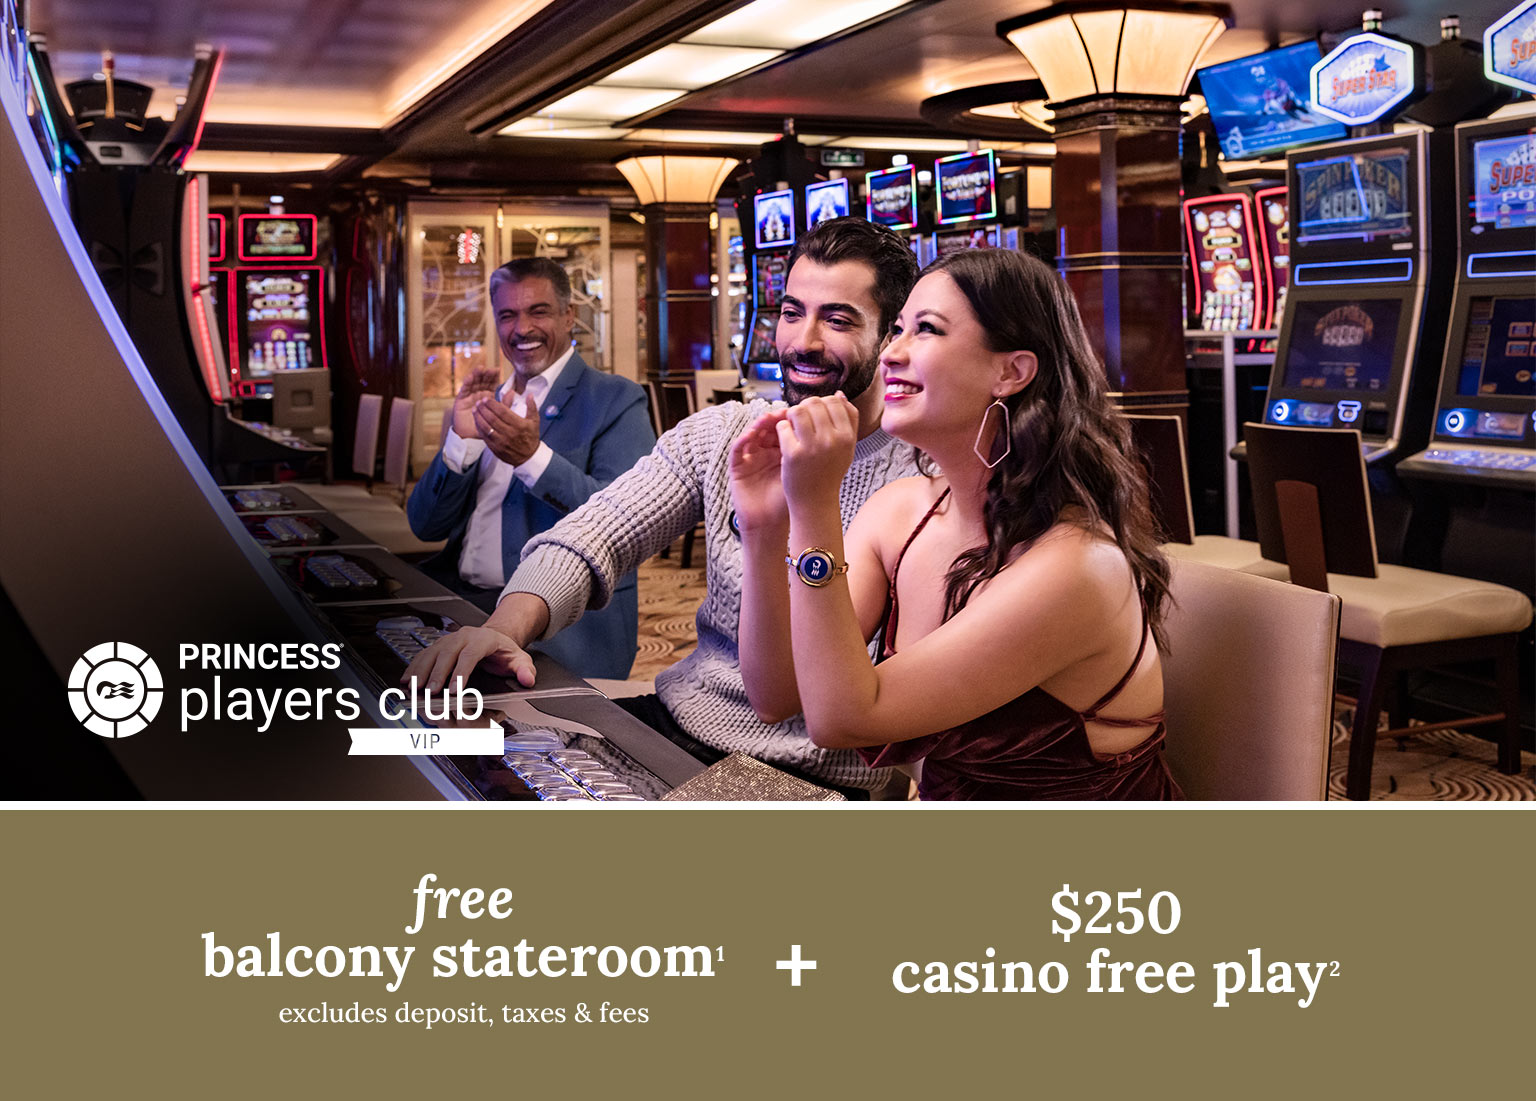 Free balcony stateroom + $250 casino free play. Click here to book.